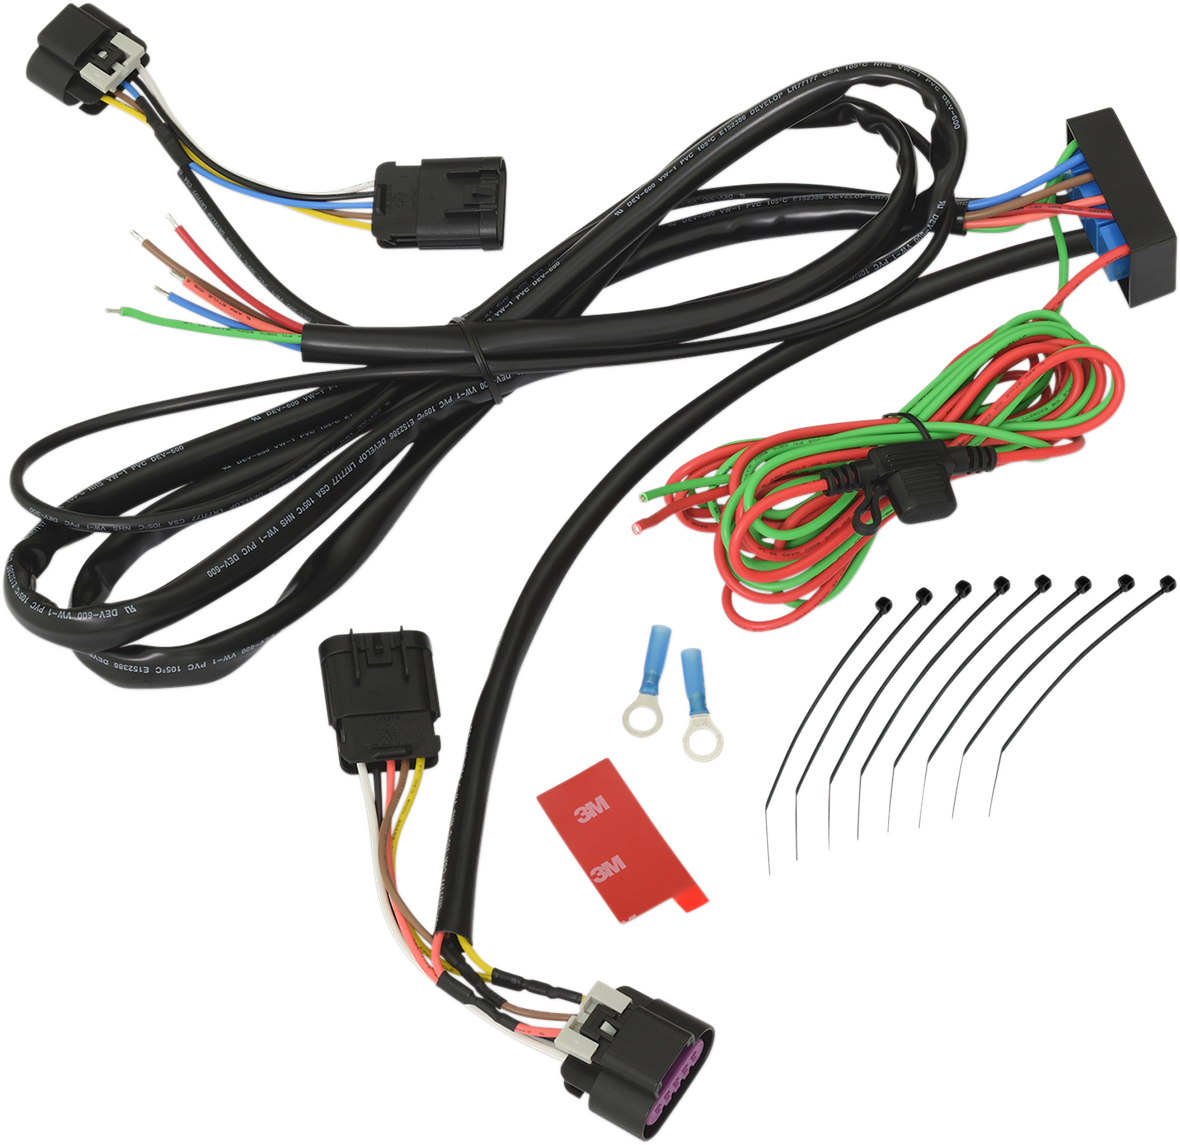 SHOW CHROME TRAILER WIRING HARNESS TRAILER WIRE HARNESS